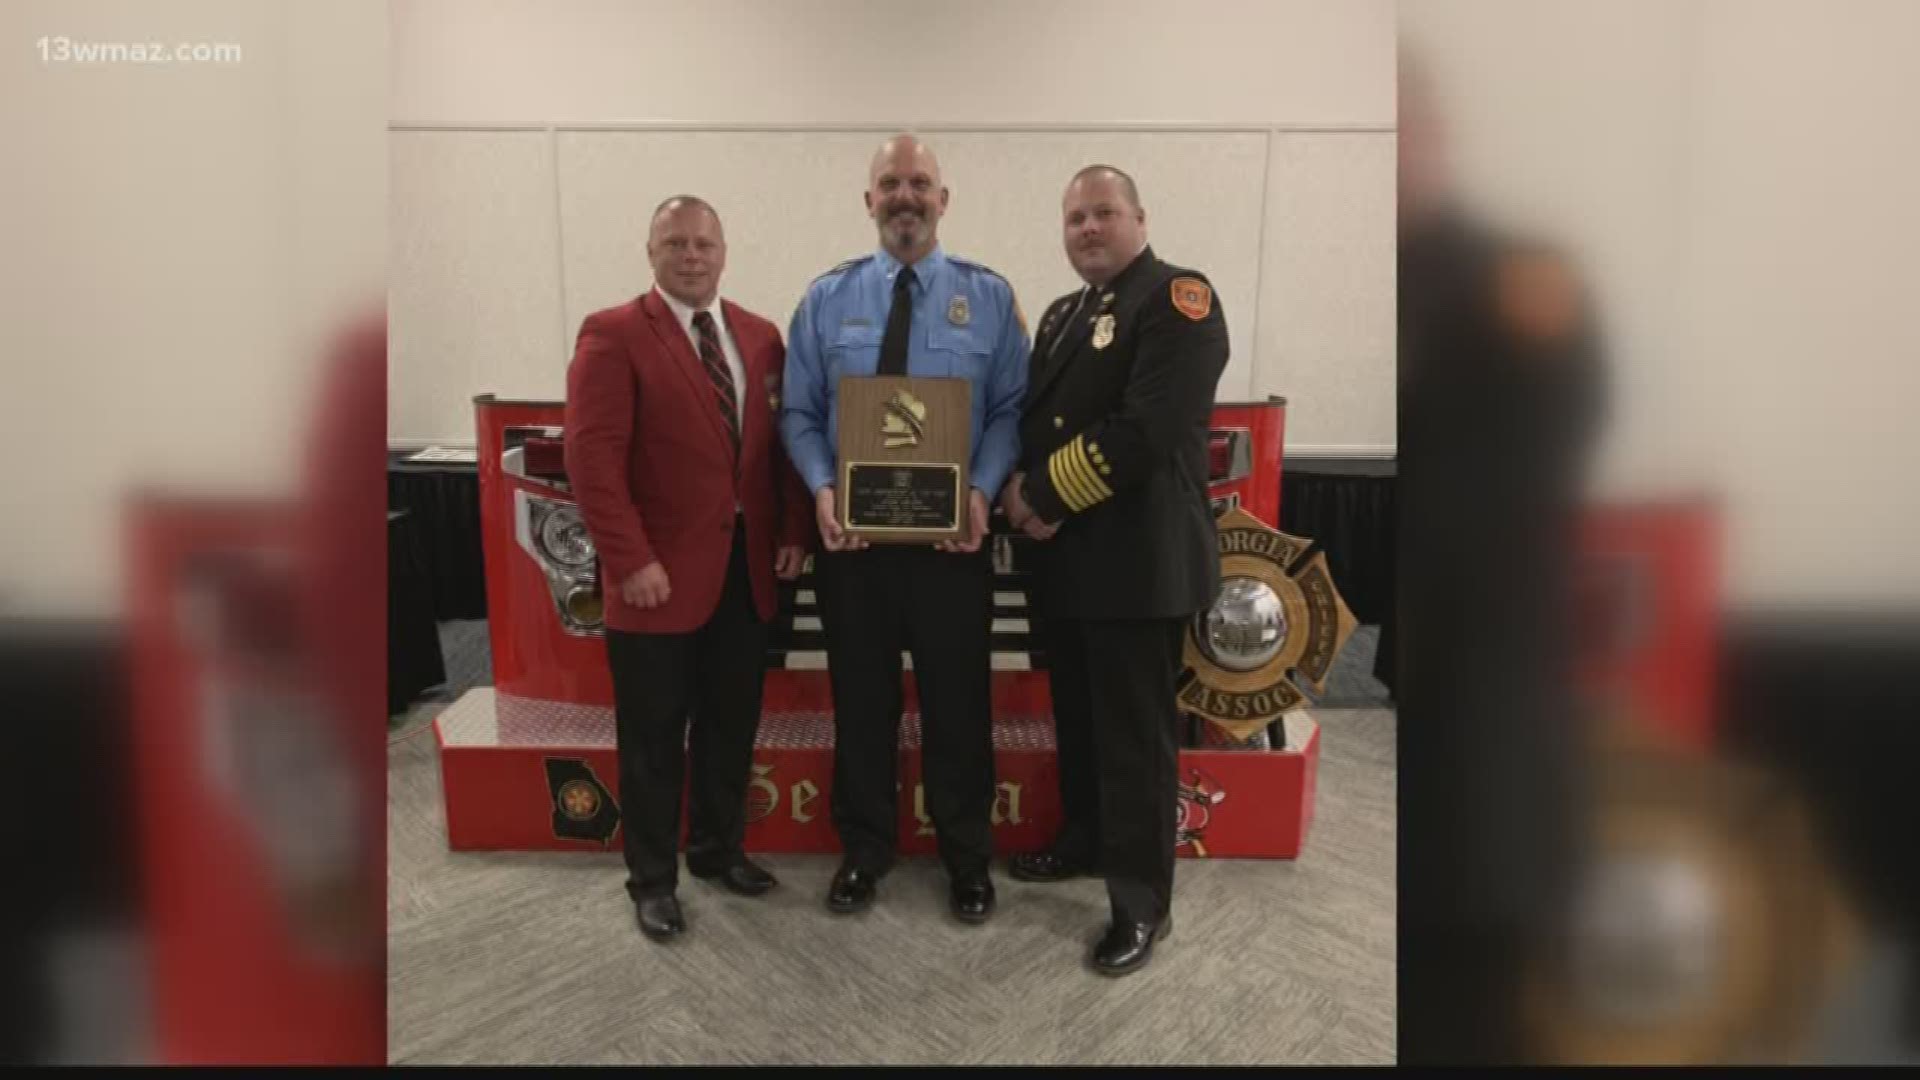 Robins Air Force Base's Joseph LeMaster is volunteering at the Houston County Fire Department. His hard work earned him Georgia's Firefighter of the Year award.